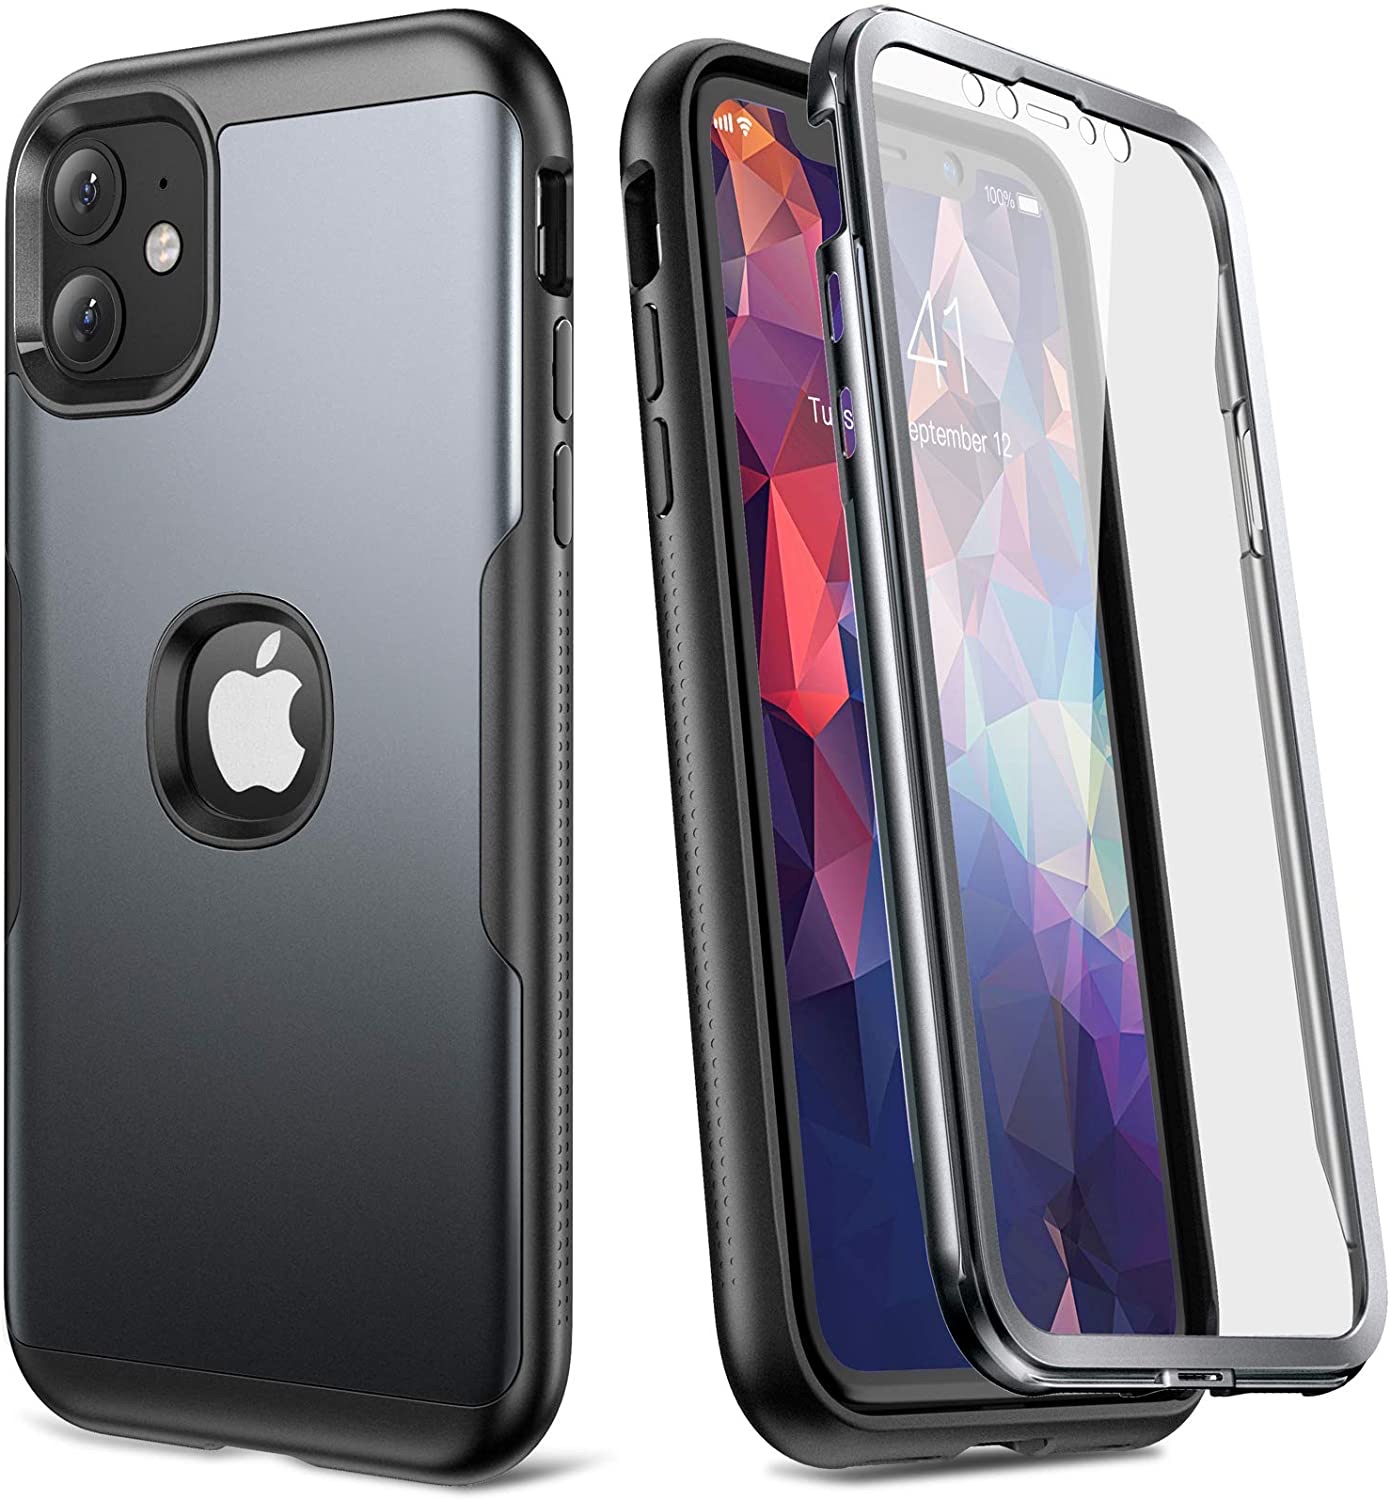 Amazon.com: YOUMAKER Metallic Designed Full Body Rugged with Built-in Screen Protector Heavy Duty Protection Slim Fit Shockproof Cover for iPhone 11 Case 6.1 Inch (2019) -手机壳iphone11